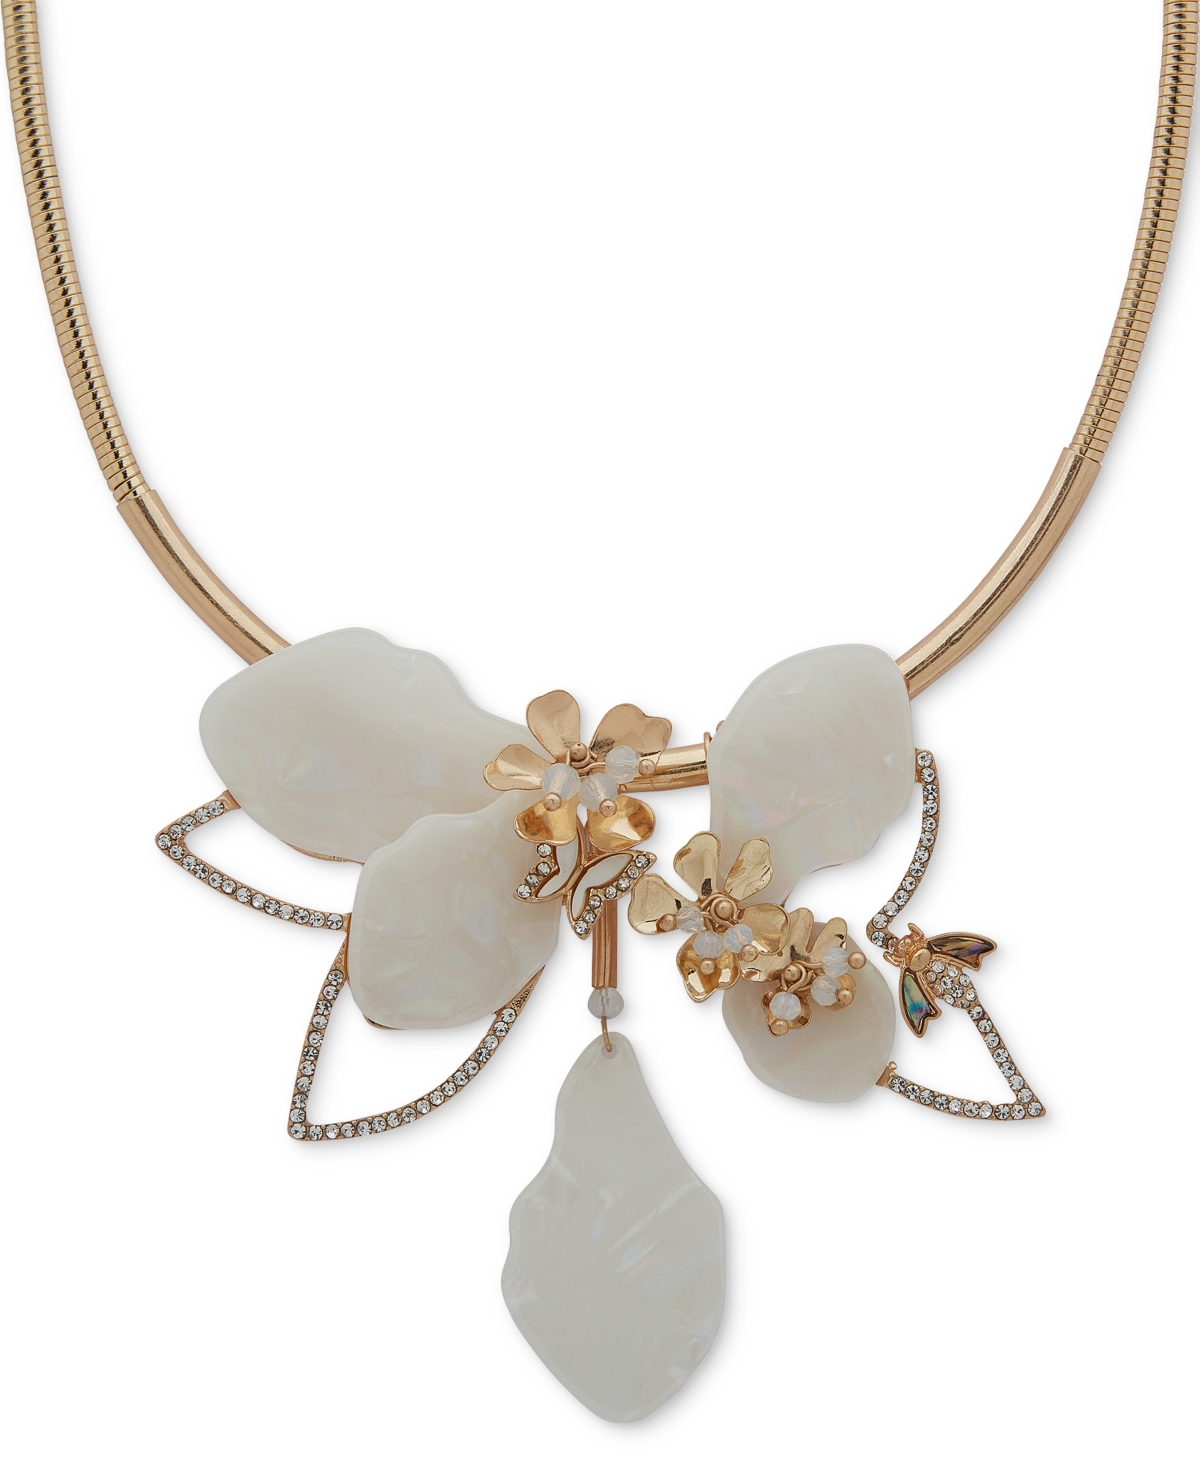 Lonna & Lilly Gold-tone Pave & Bead Flower Statement Necklace, 16" + 3" Extender In White